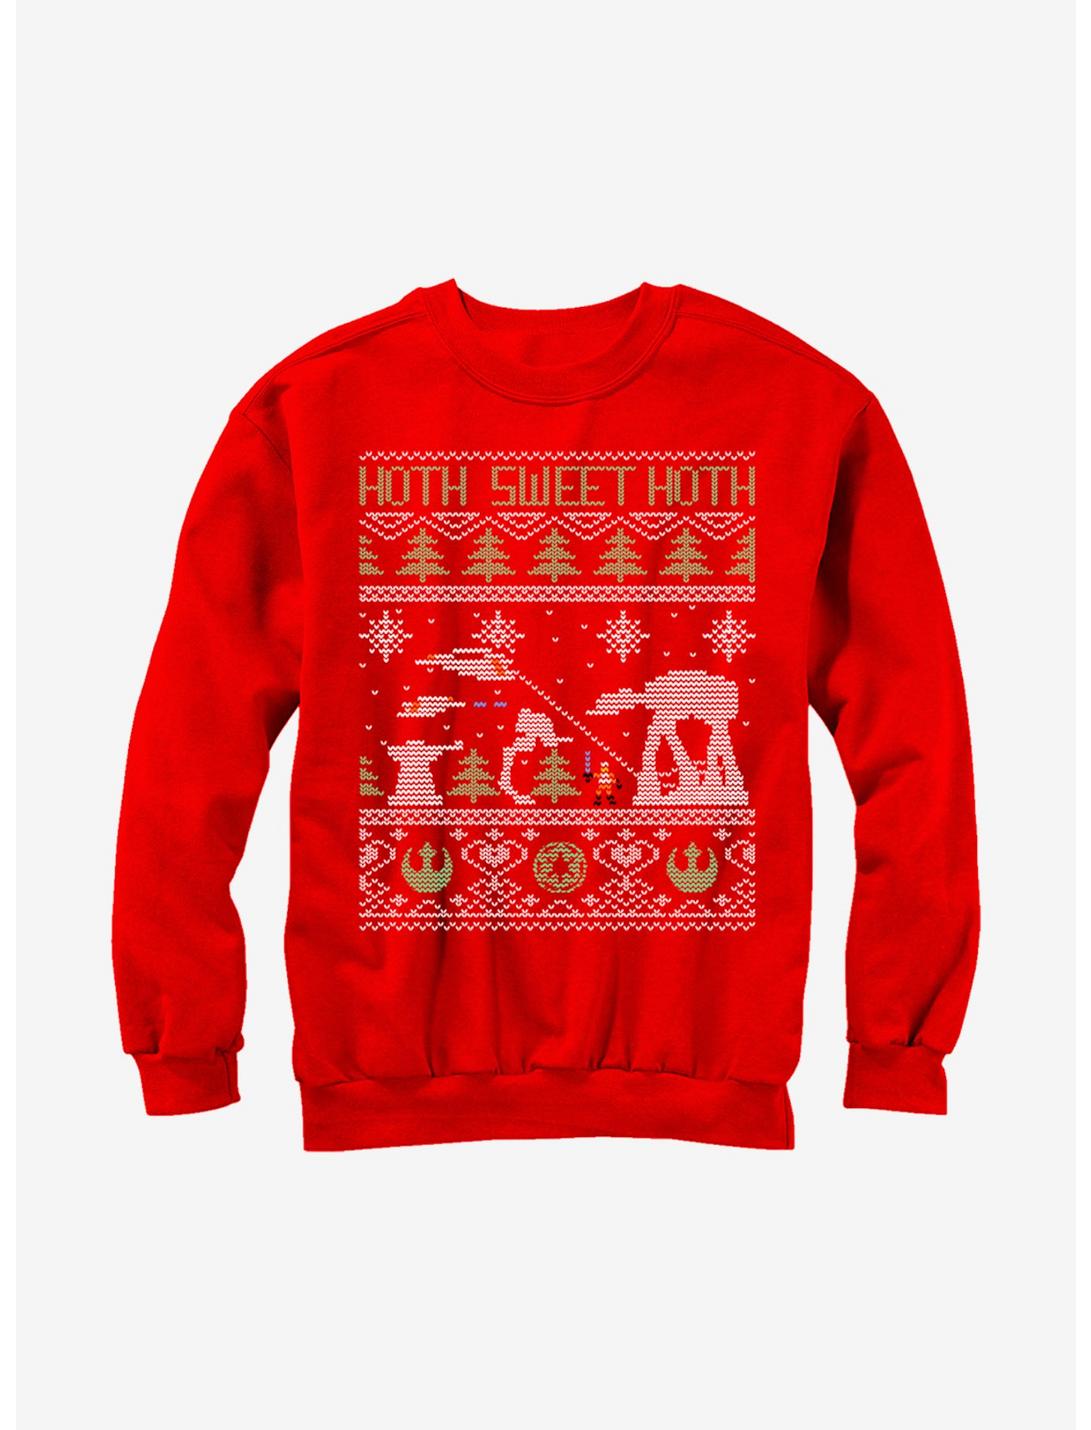 Star Wars Hoth Sweet Hoth Ugly Christmas Sweater Sweatshirt, RED, hi-res